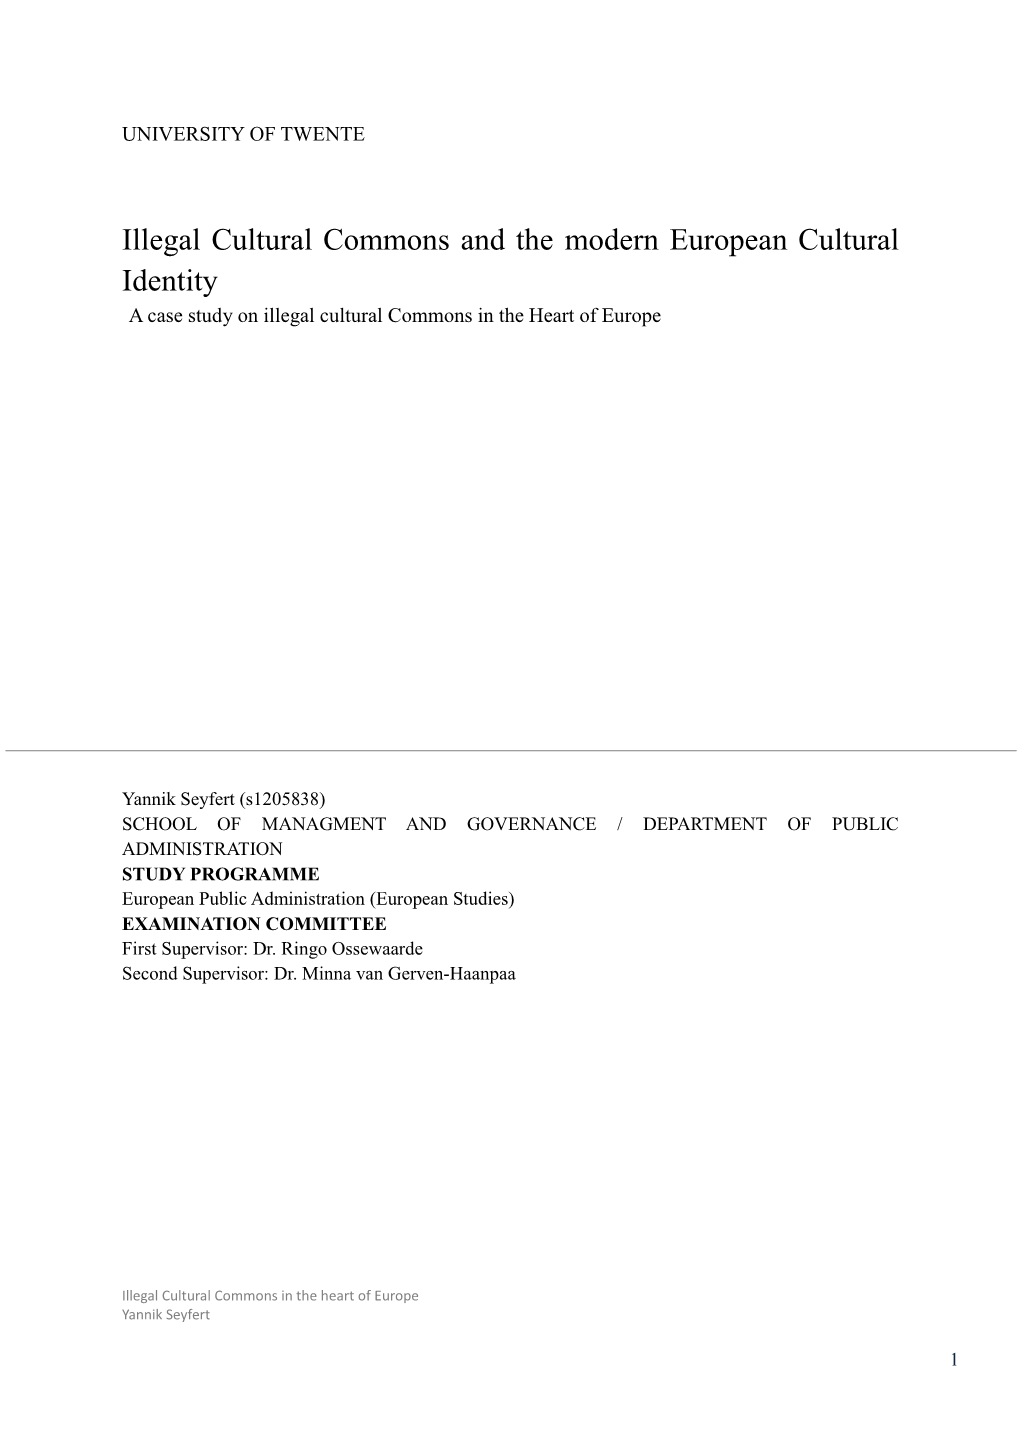 Illegal Cultural Commons and the Modern European Cultural Identity a Case Study on Illegal Cultural Commons in the Heart of Europe